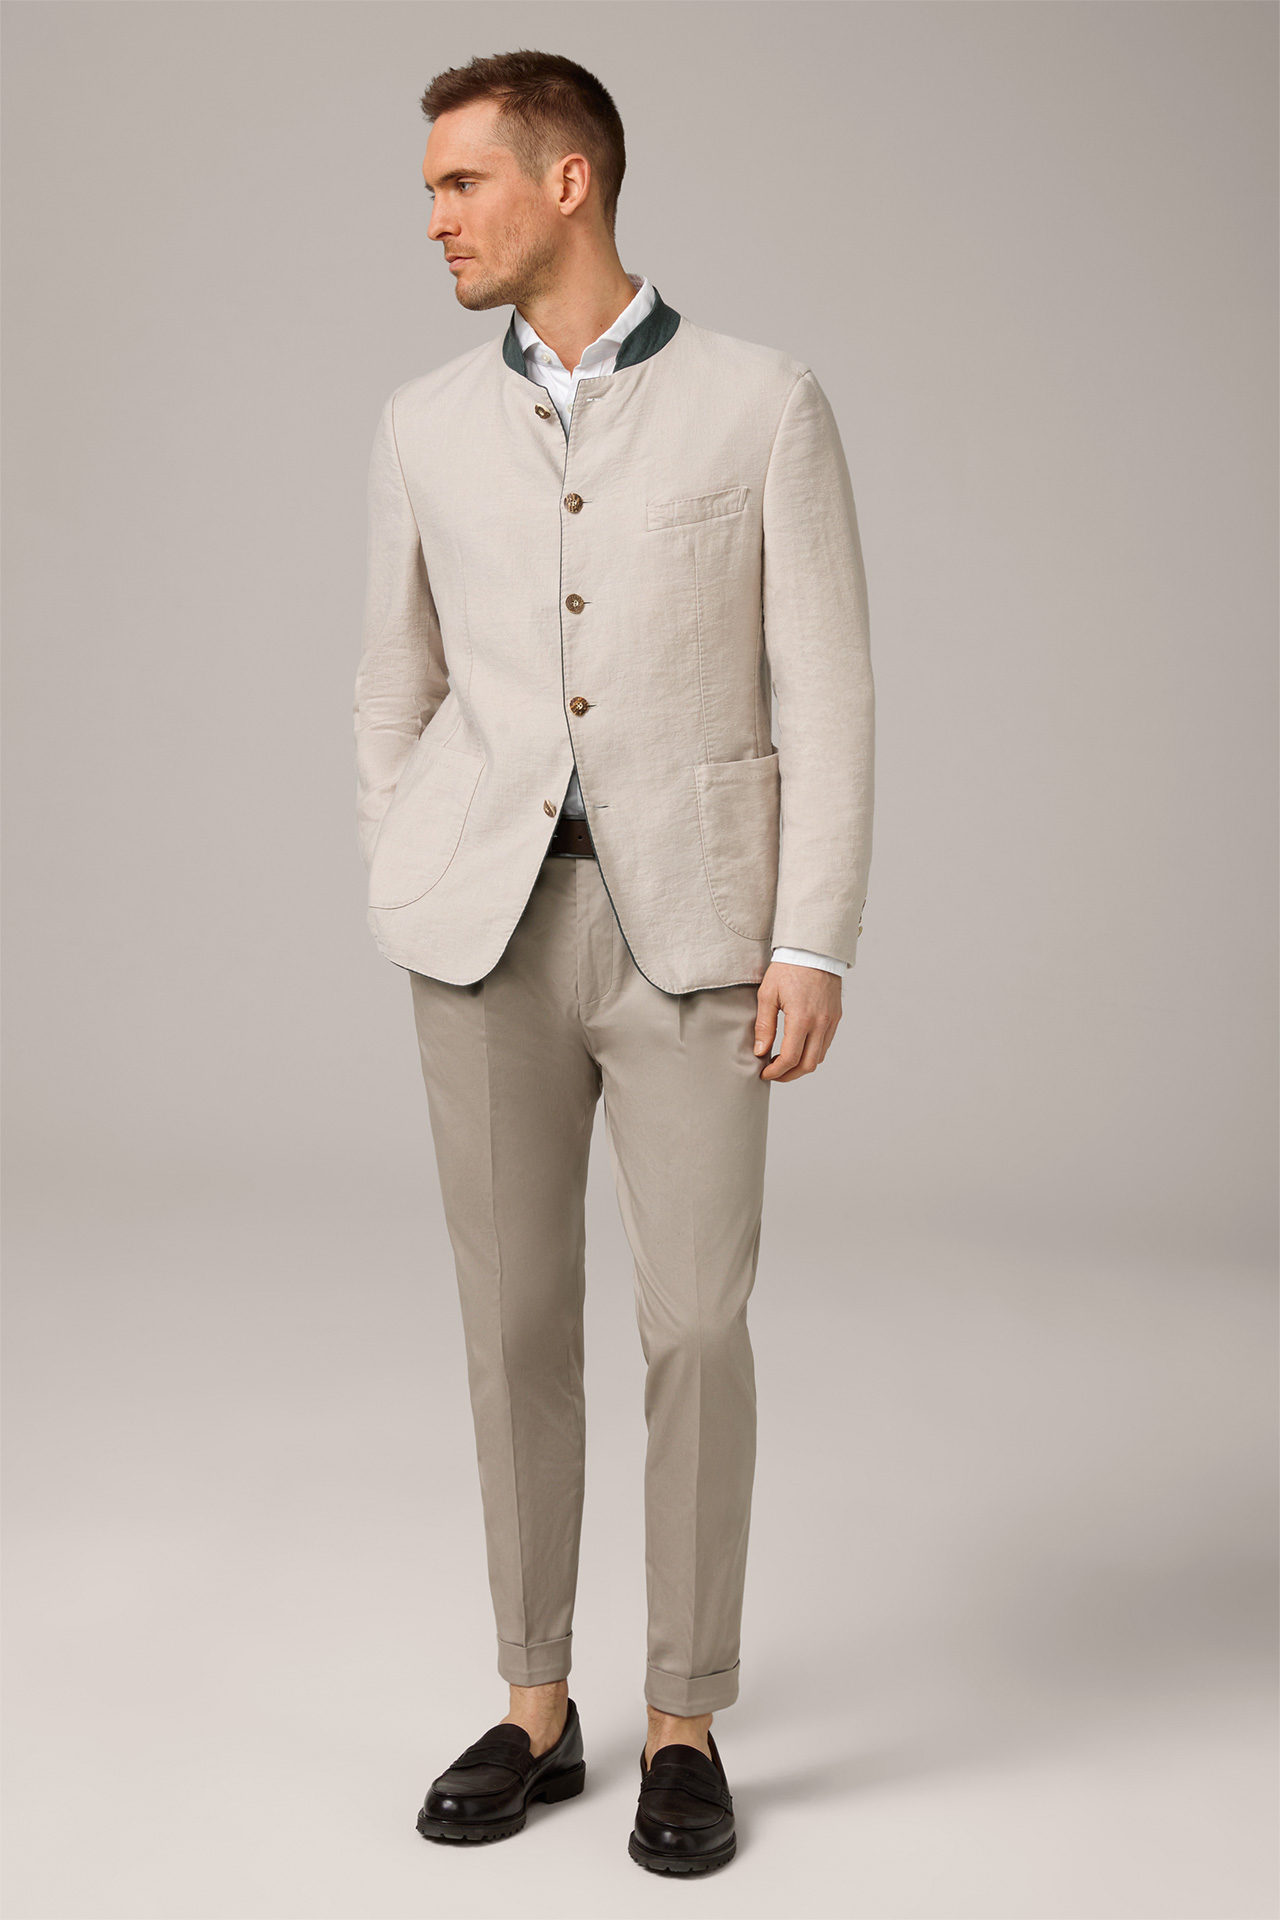 Giesing Traditional Jacket in Light Beige